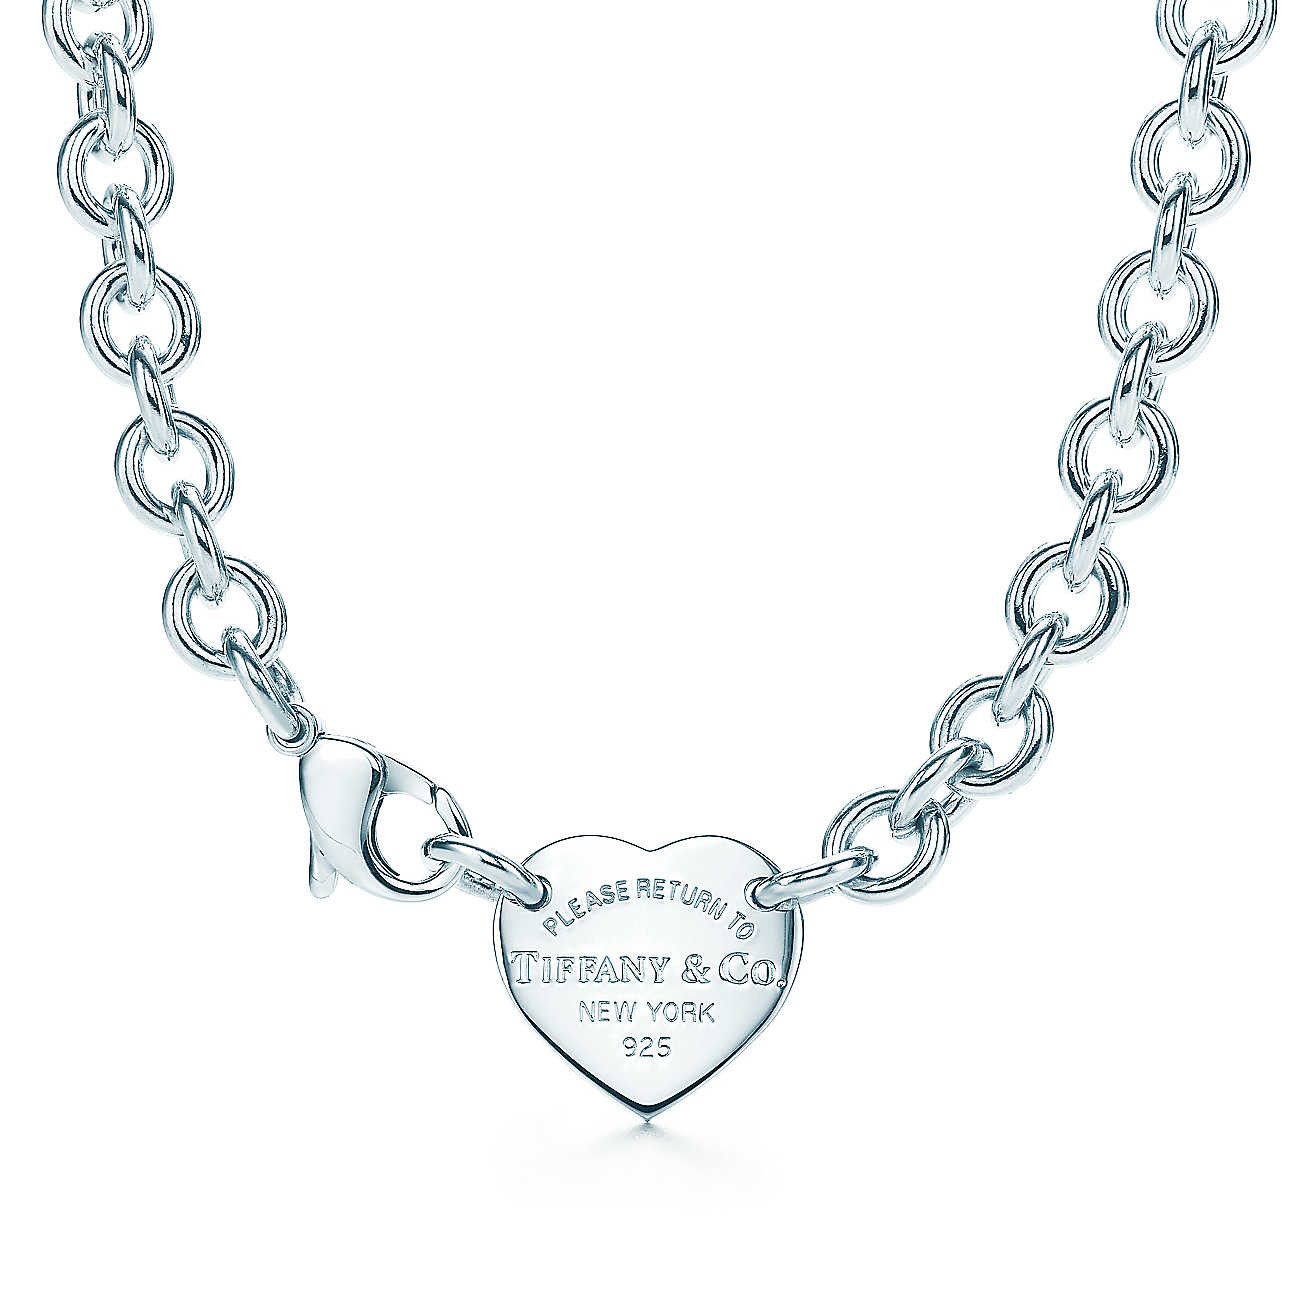 Tiffany And Co Necklace
 Return to Tiffany heart tag choker in sterling silver